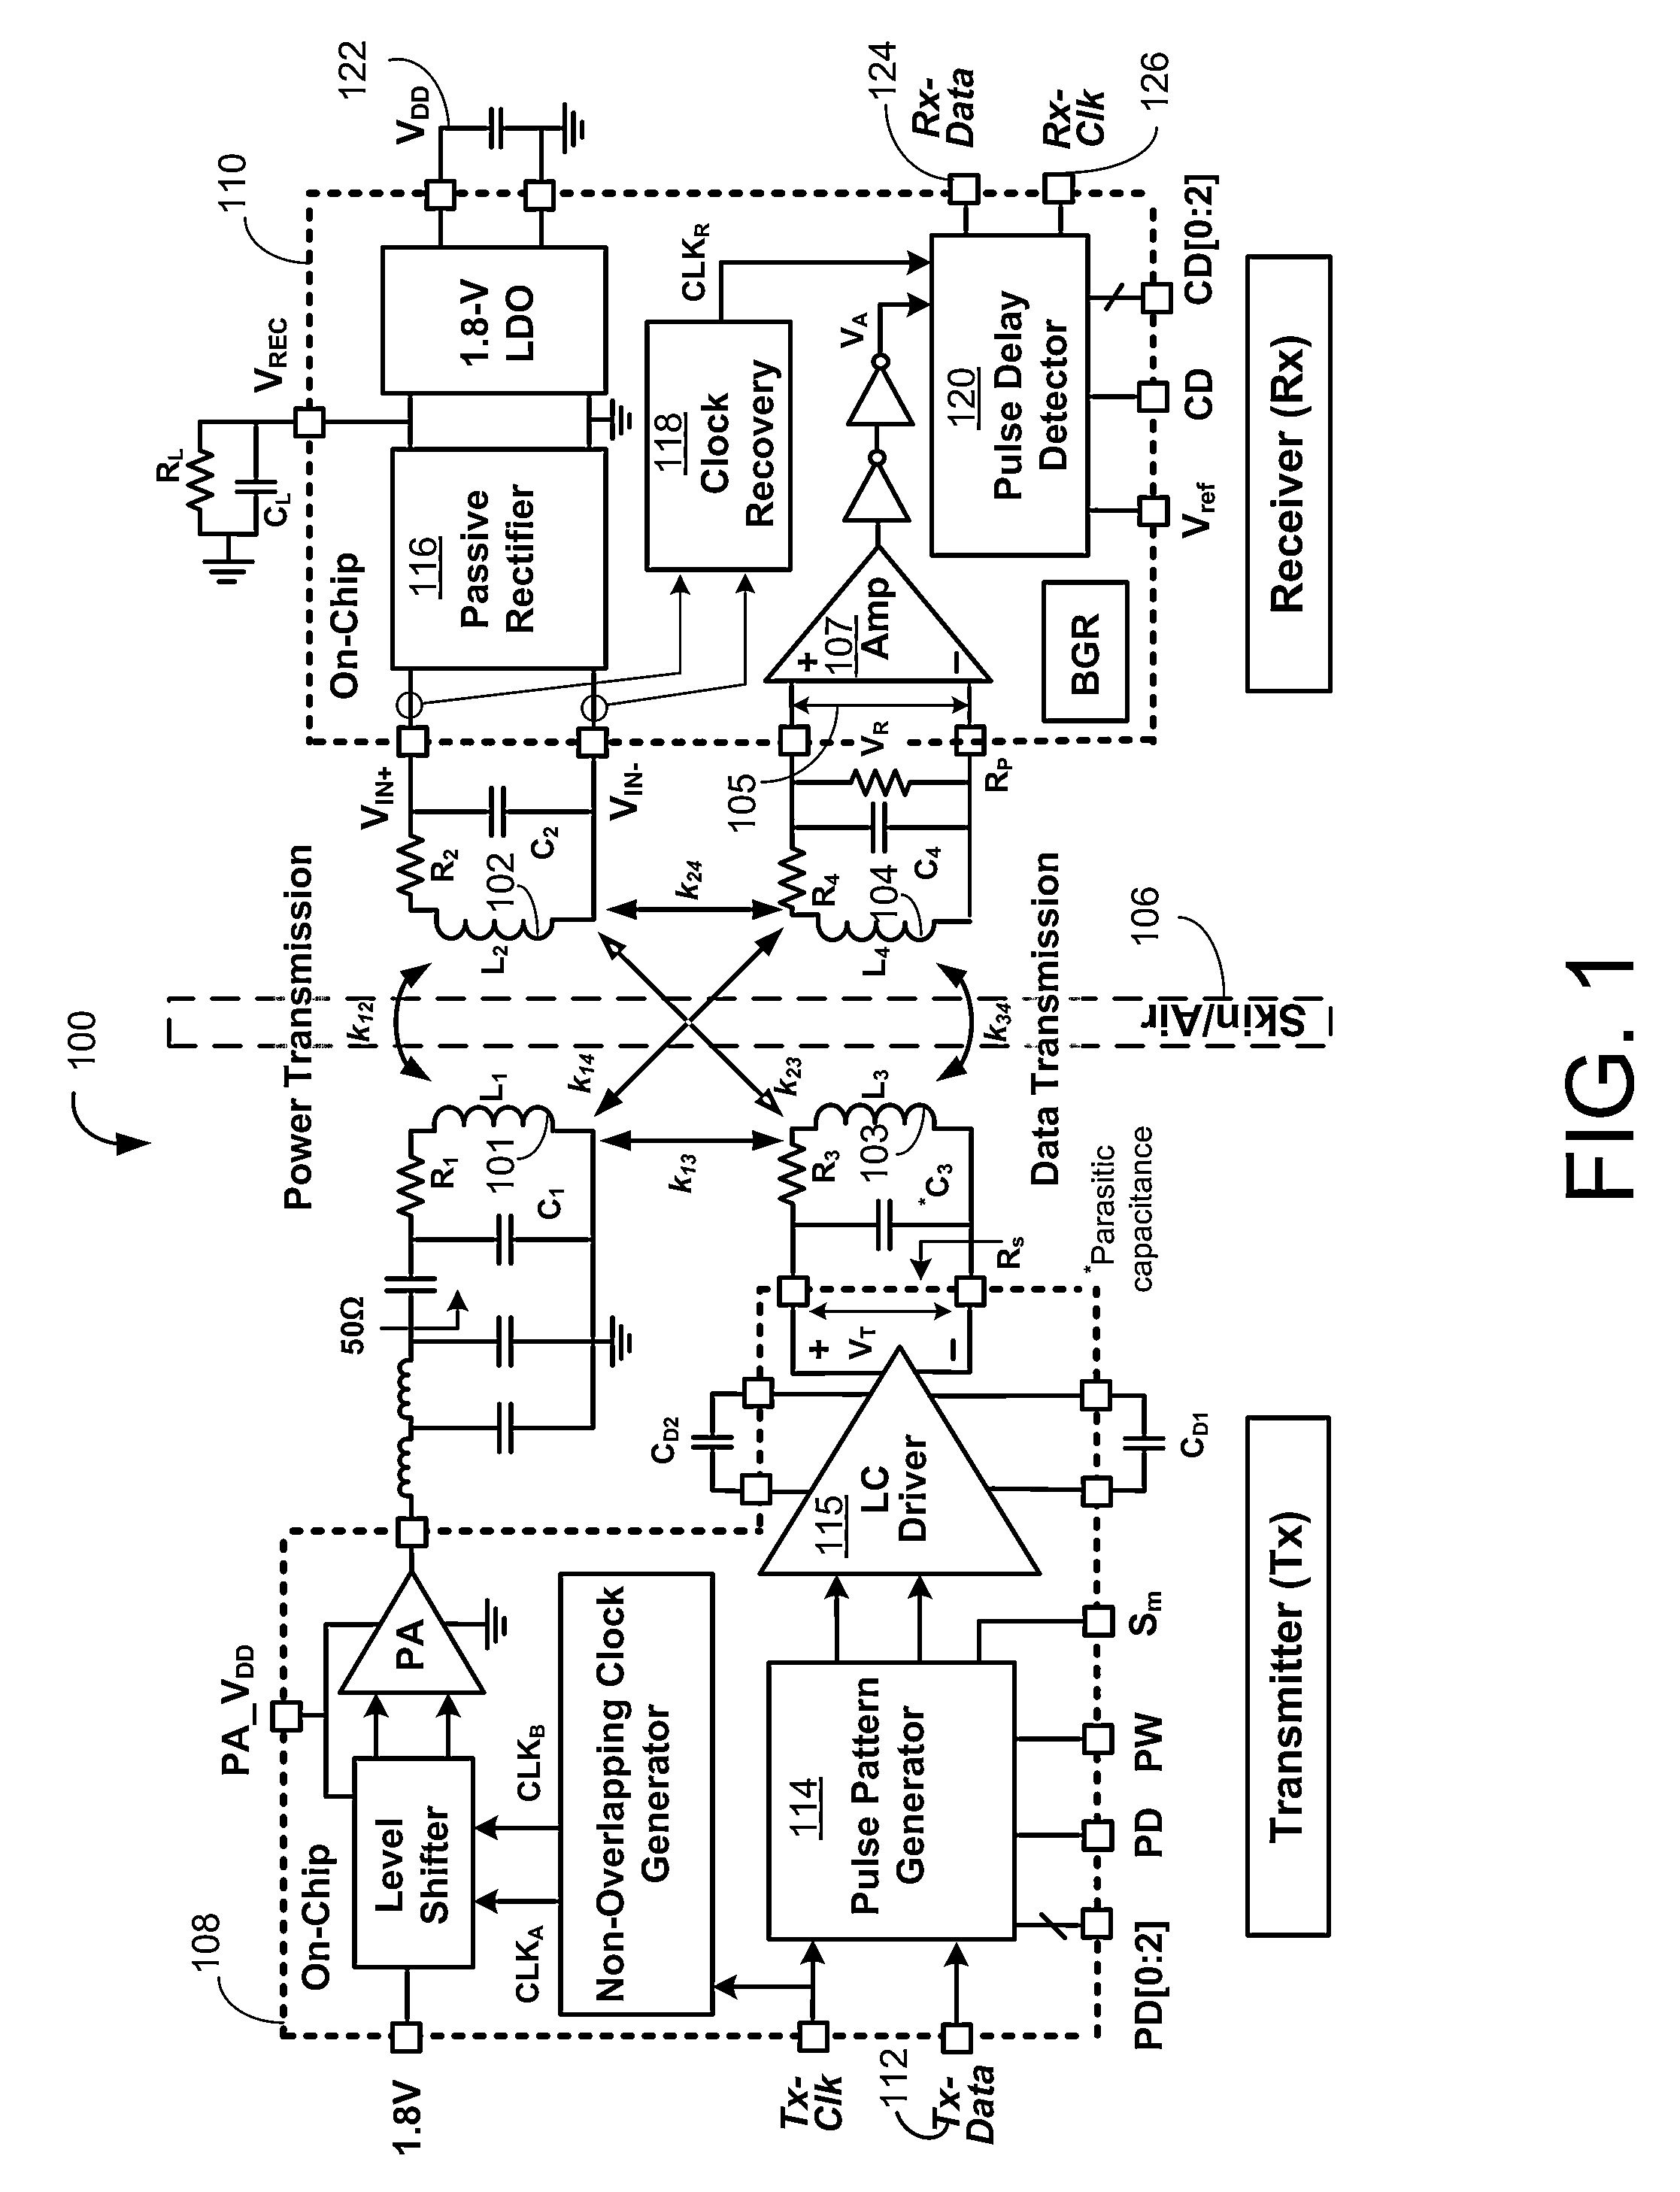 Wideband data and power transmission using pulse delay modulation